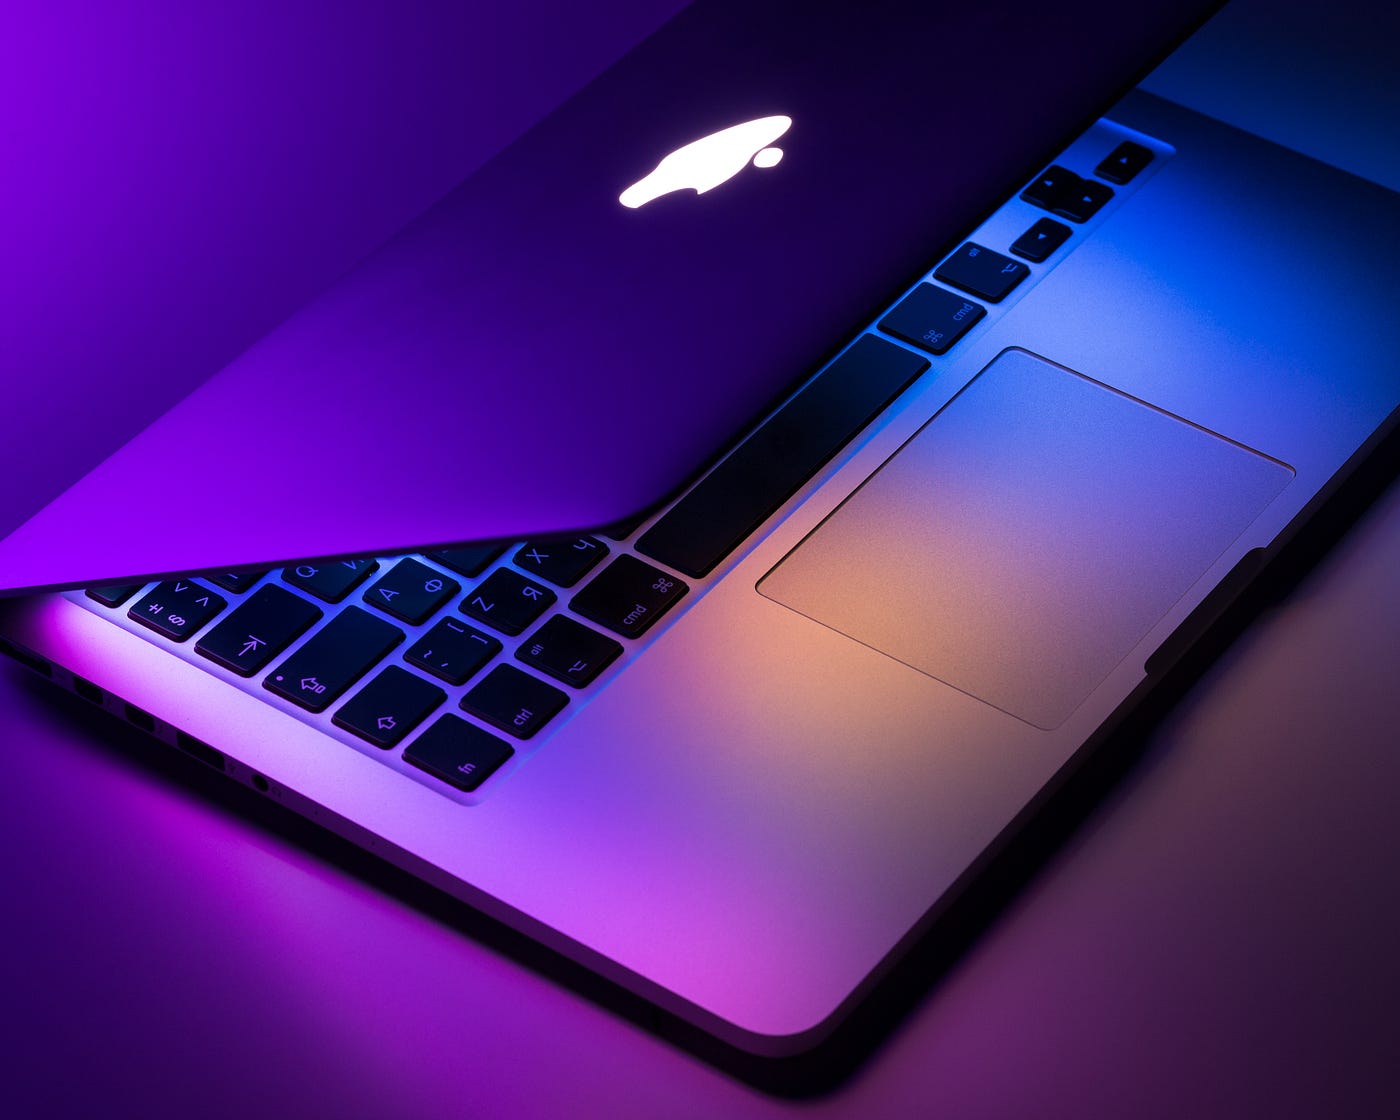 MacBook Pro 13: Should You Buy? Features, Purchase Considerations